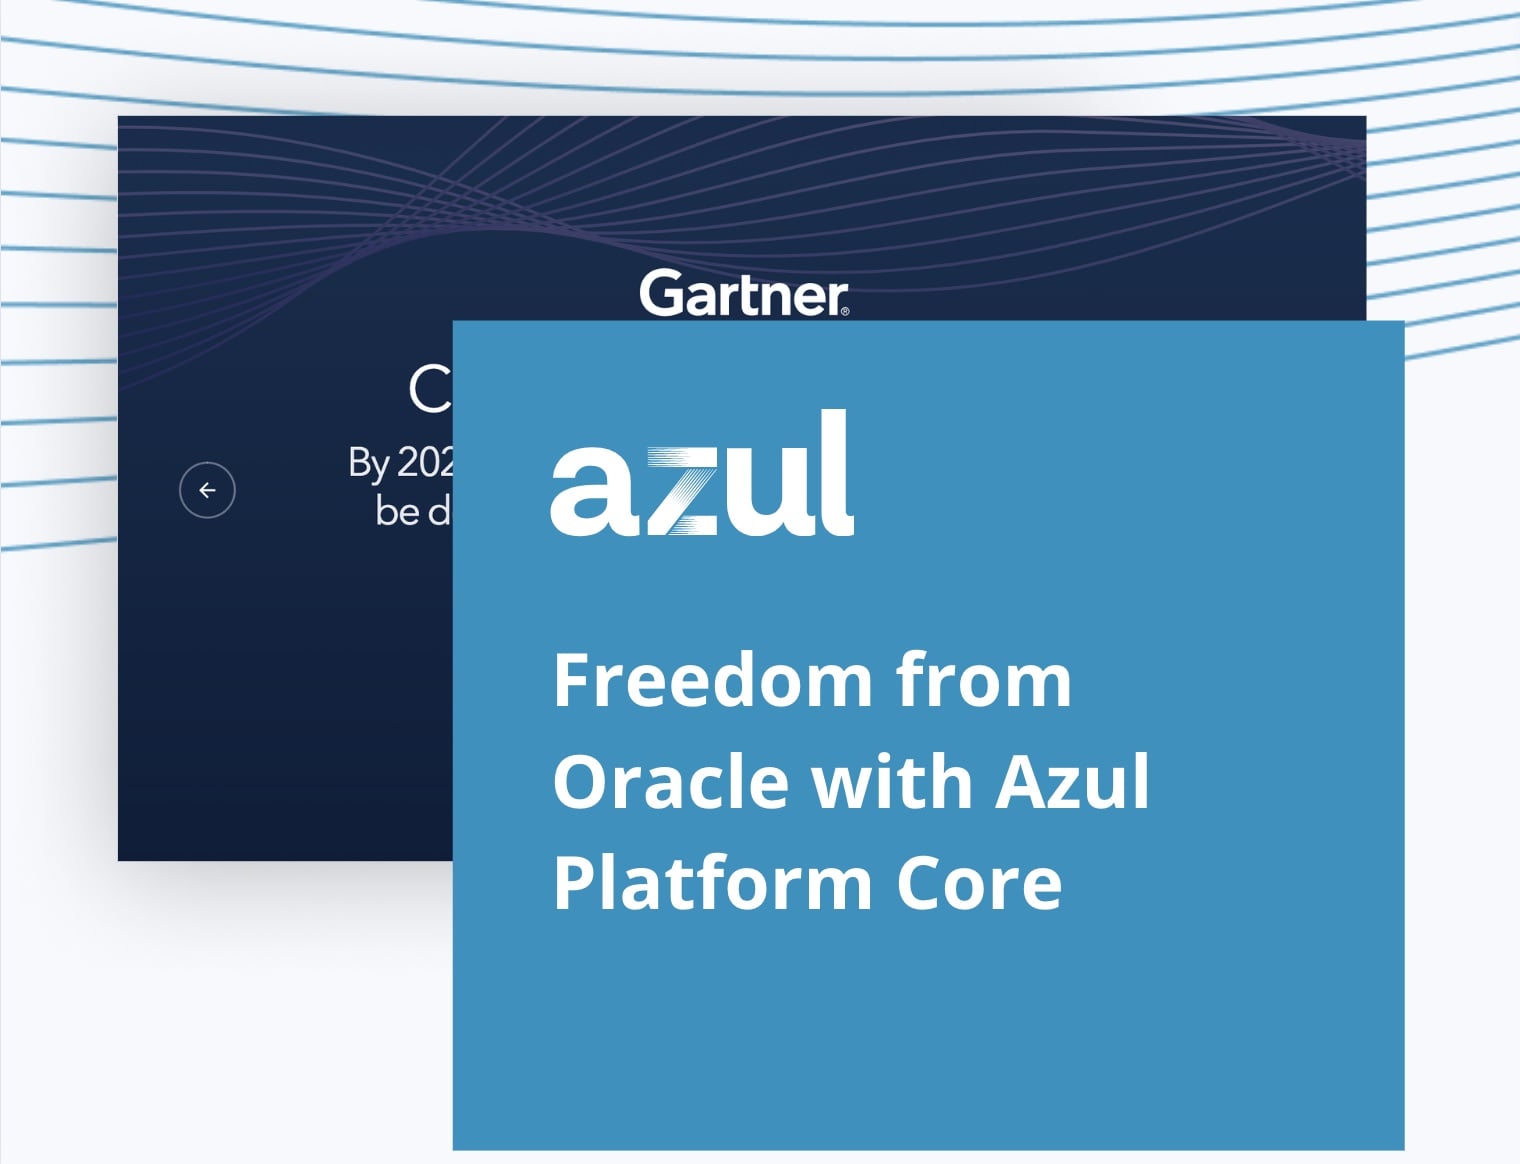 Freedom from Oracle with Azul Platform Core